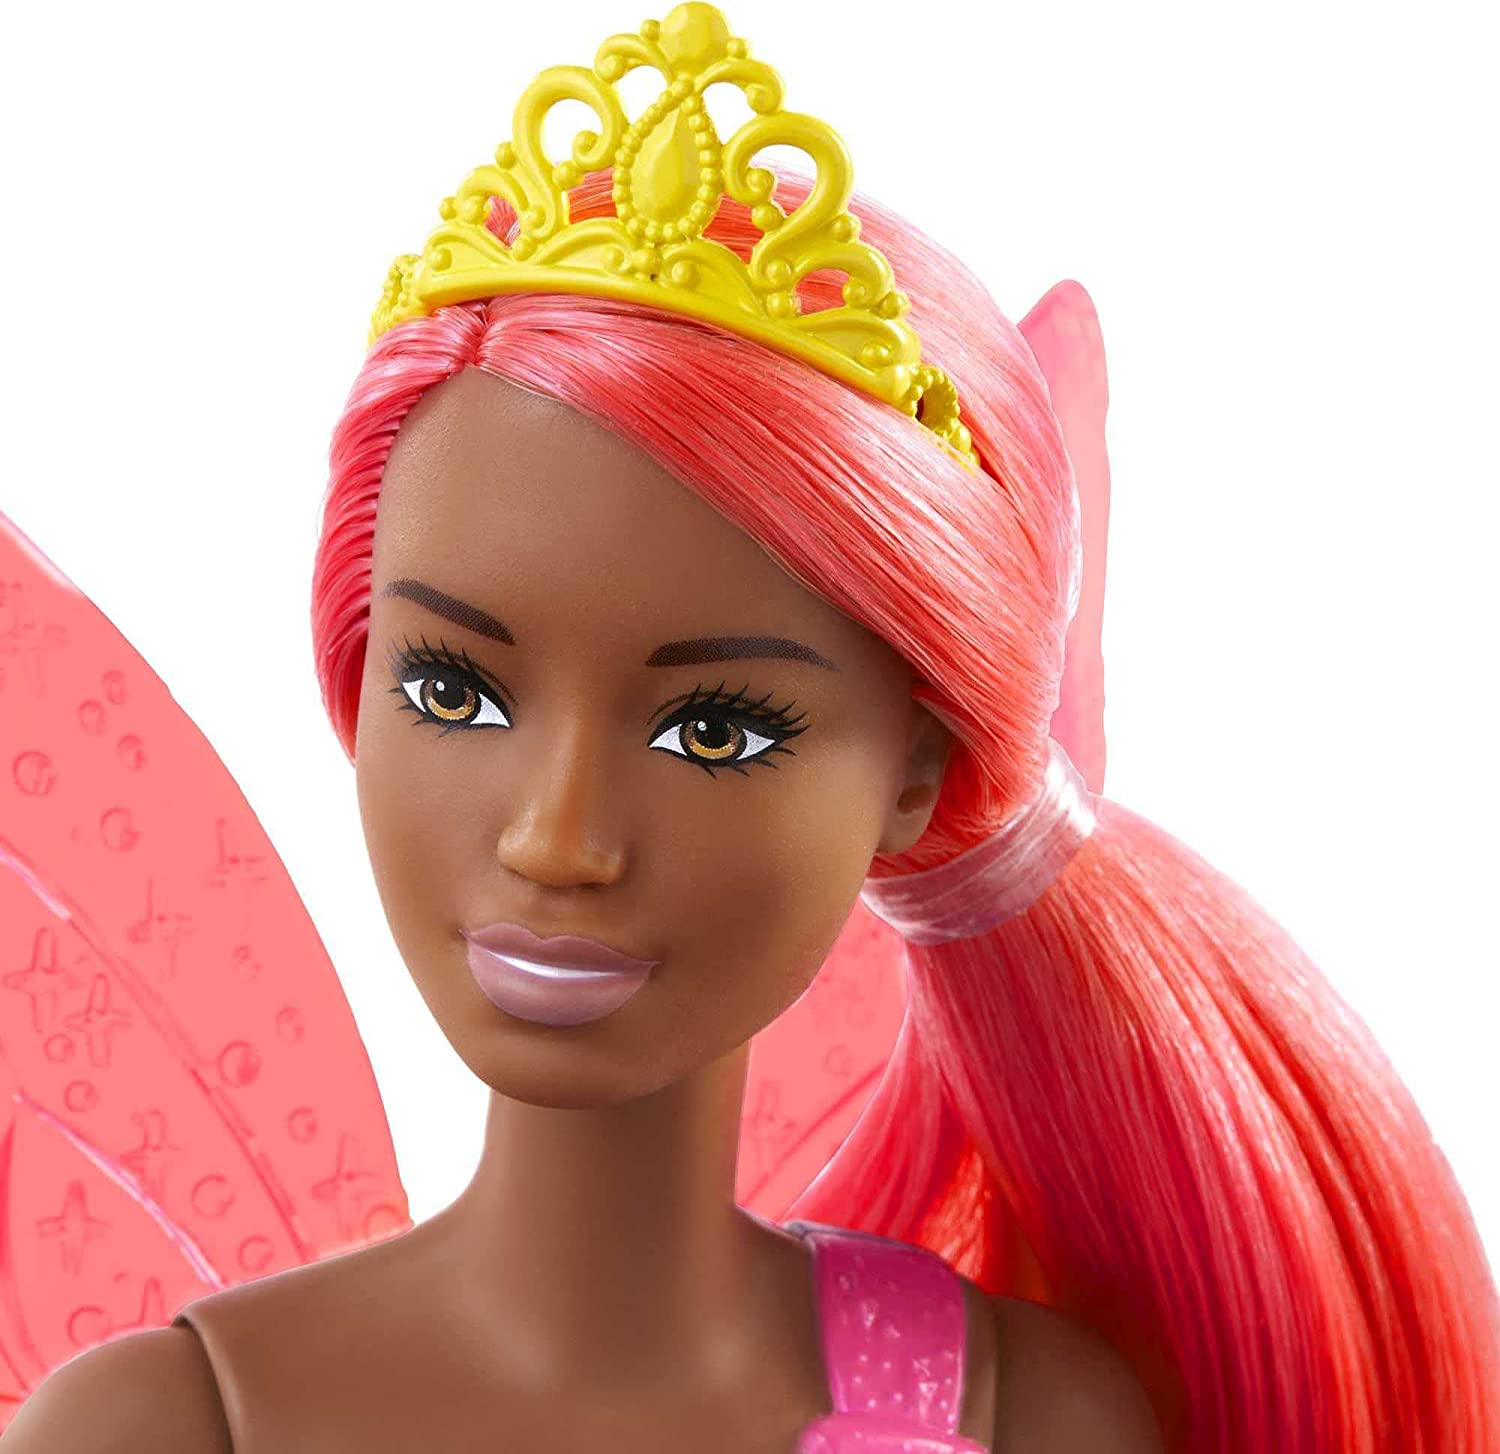 Mattel Dreamtopia Fairy Doll, 12-inch, with Pink Hair